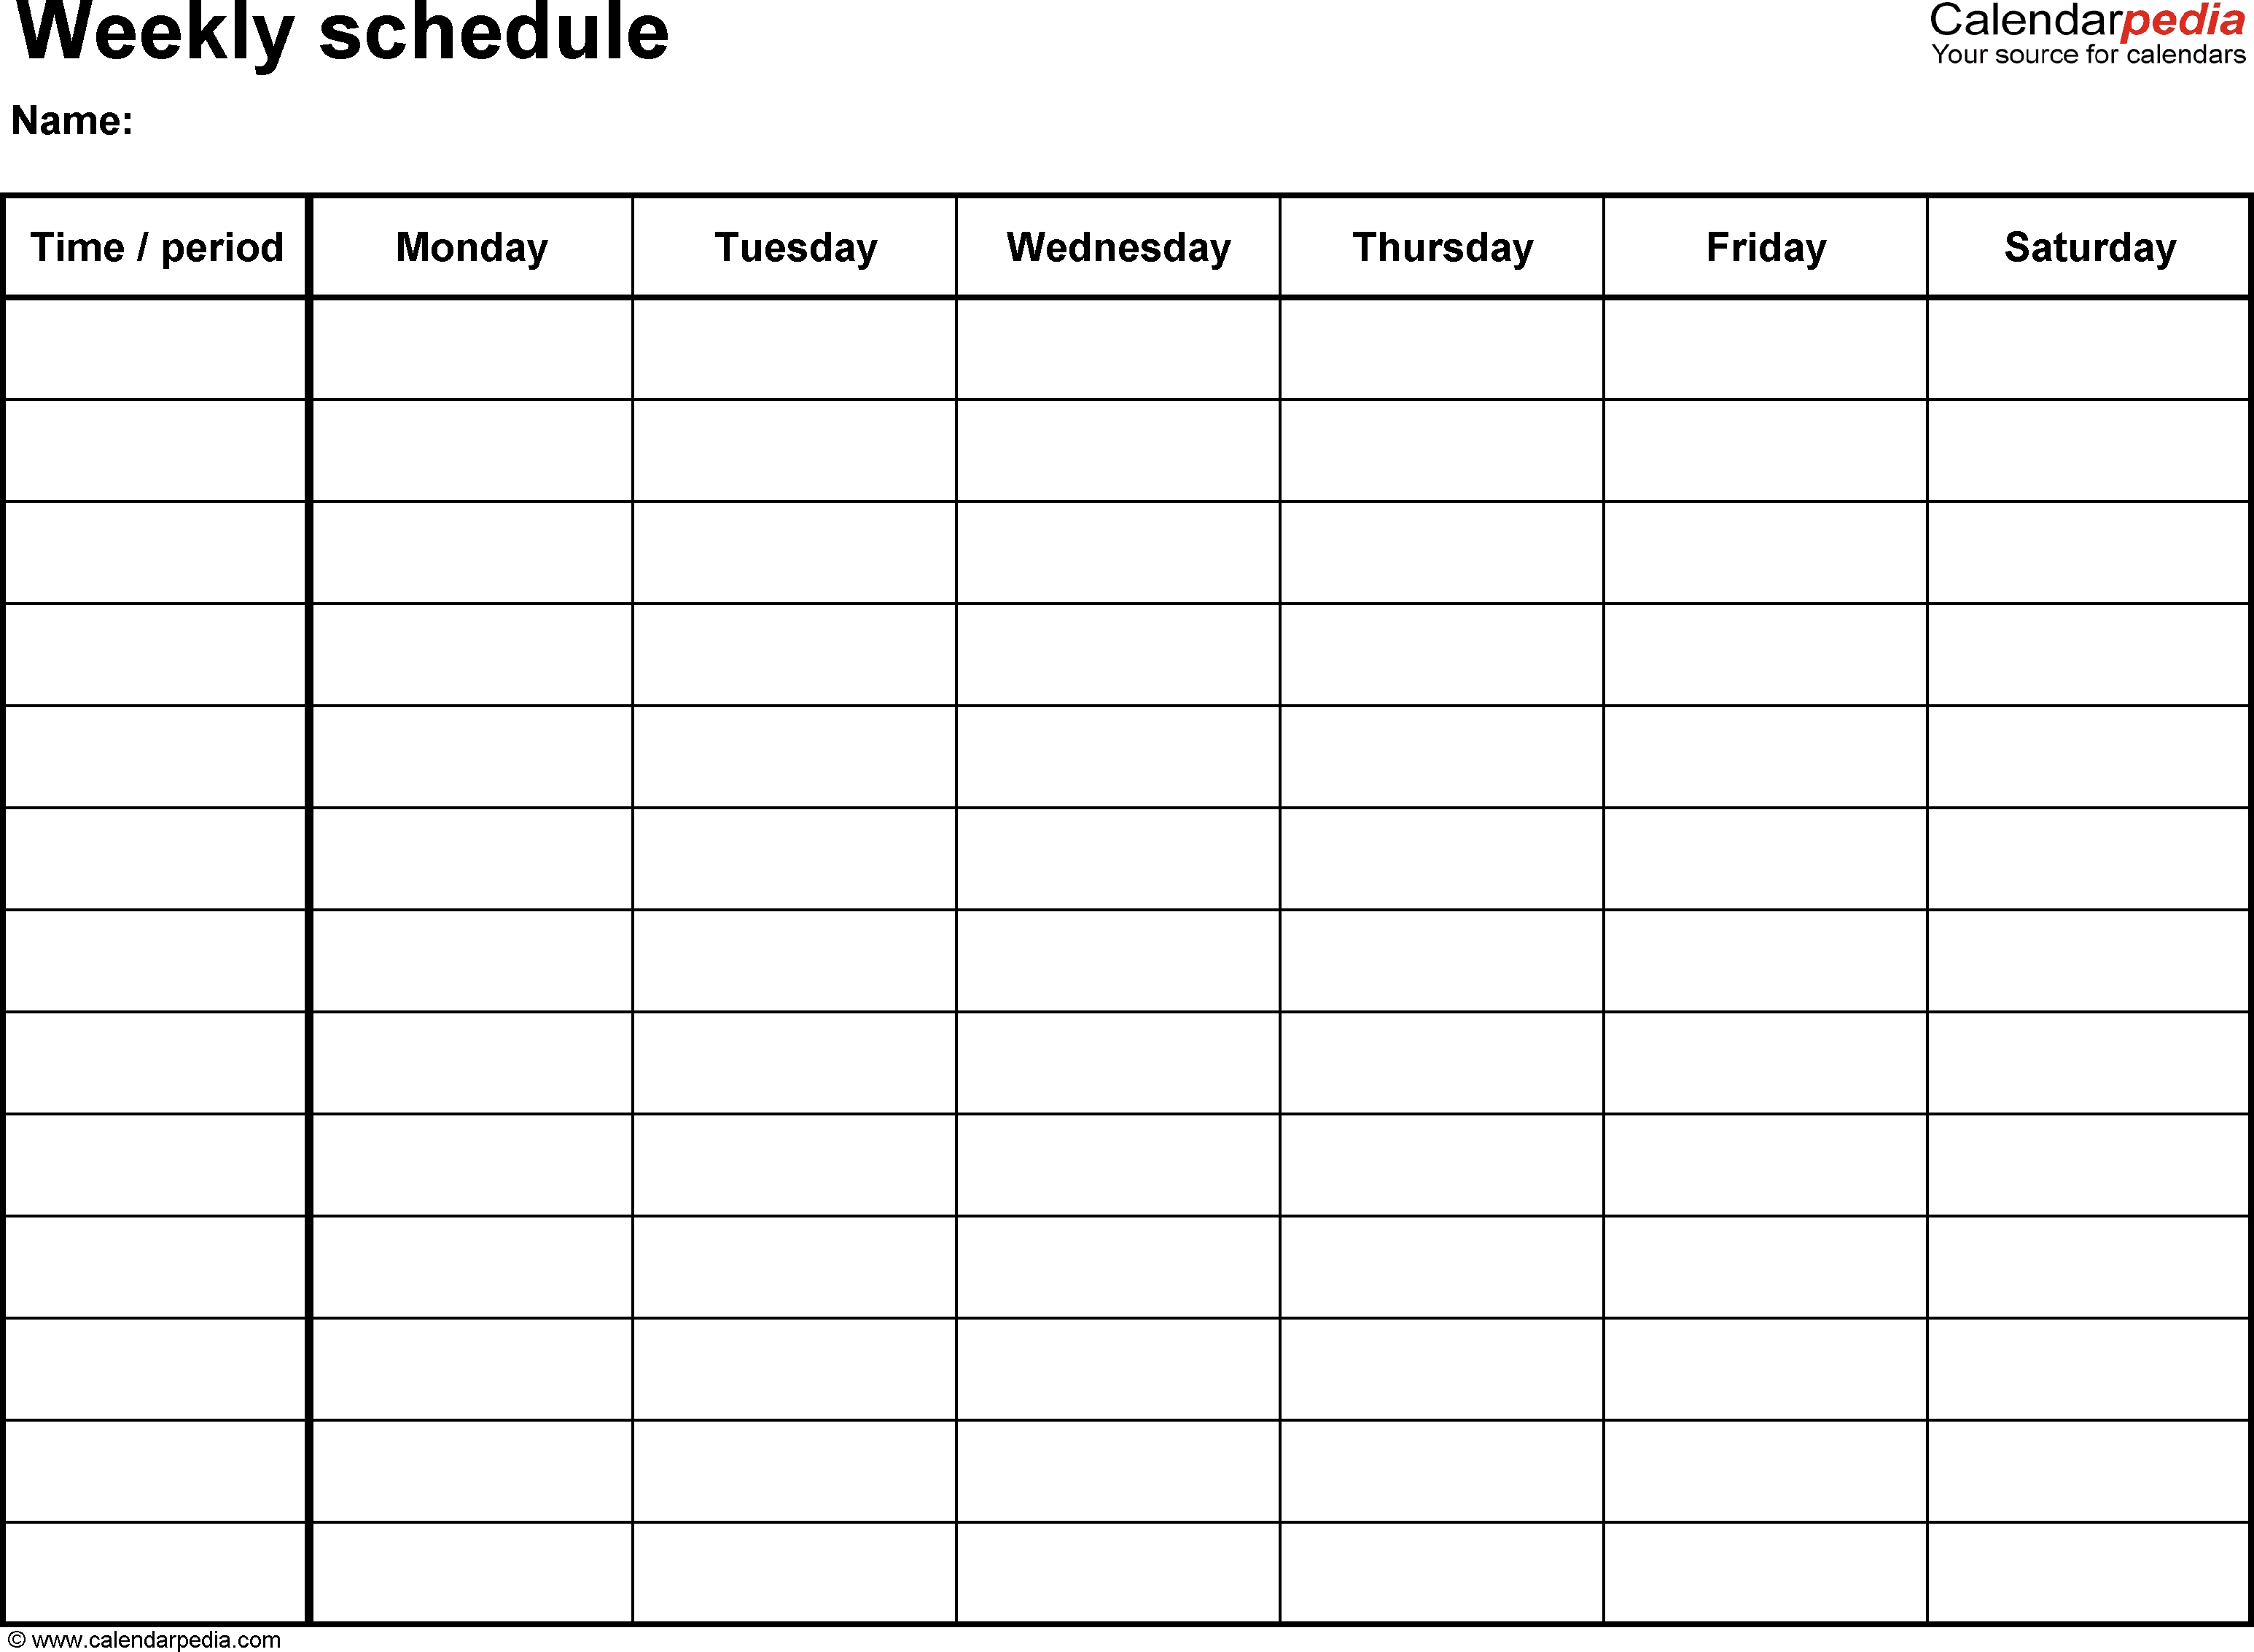 Free Weekly Schedule Templates For Excel - 18 Templates-Shift Planner Templates Printable